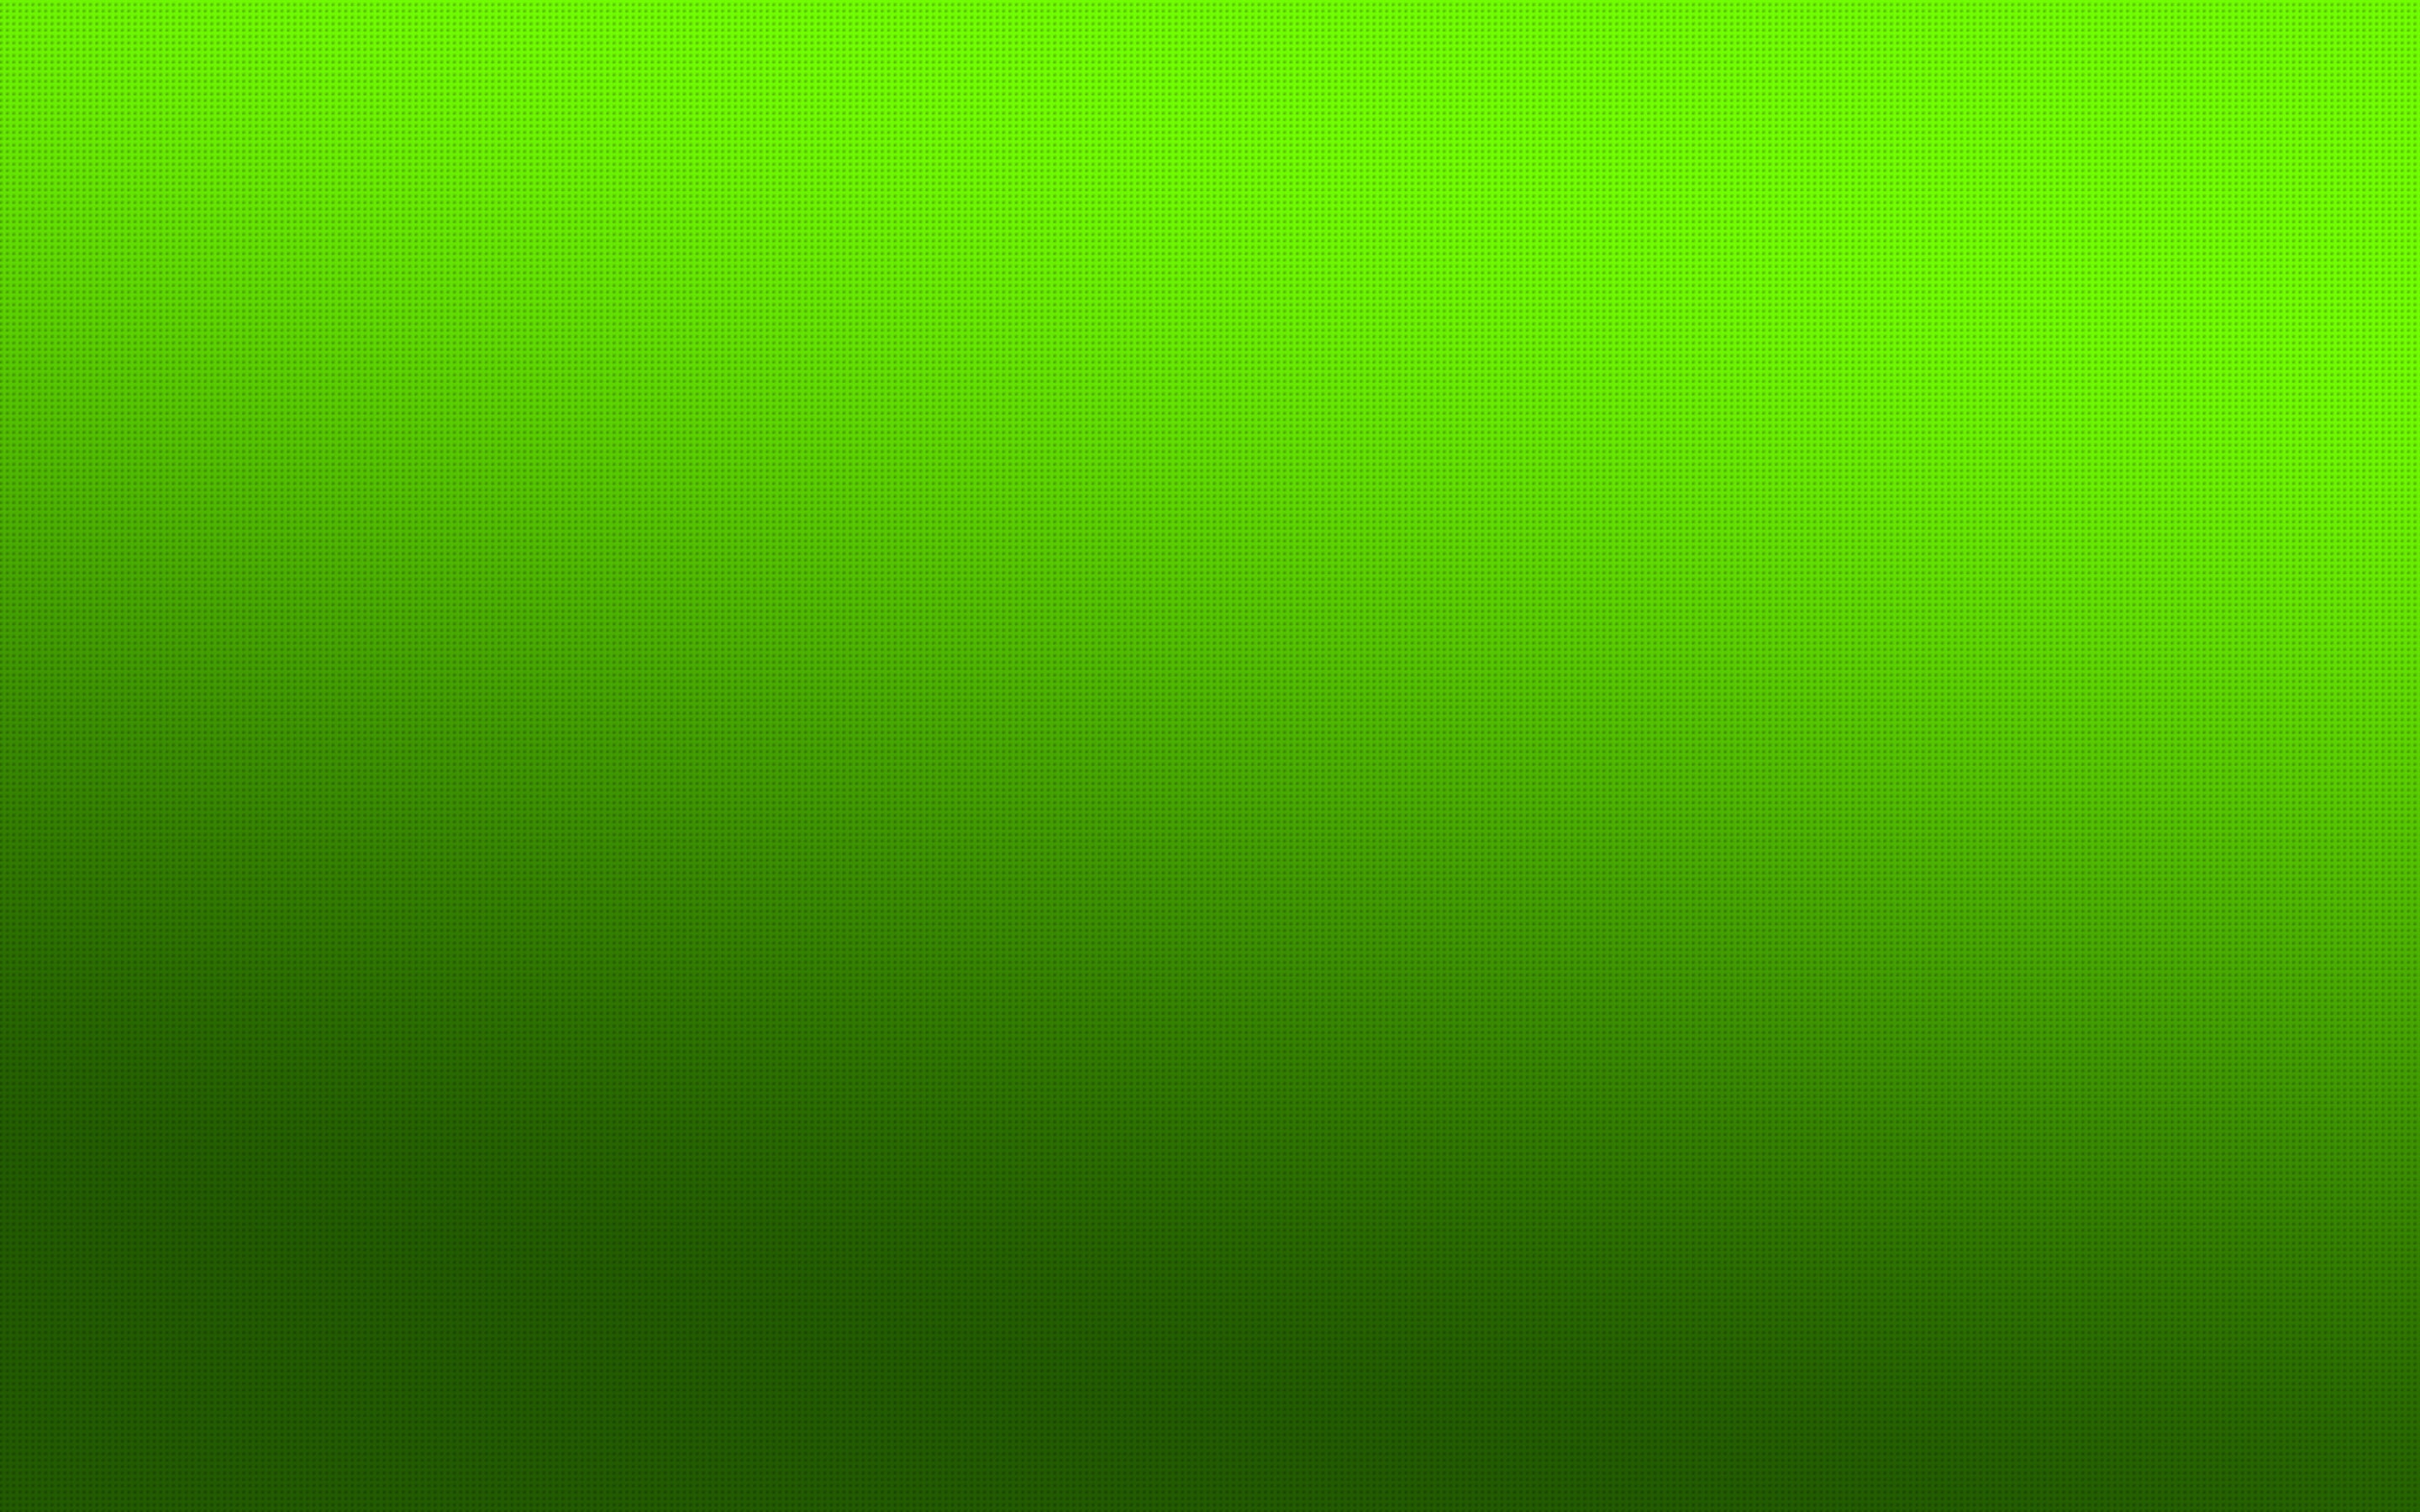 color, green, TIC, lime, green color, backgrounds, textured